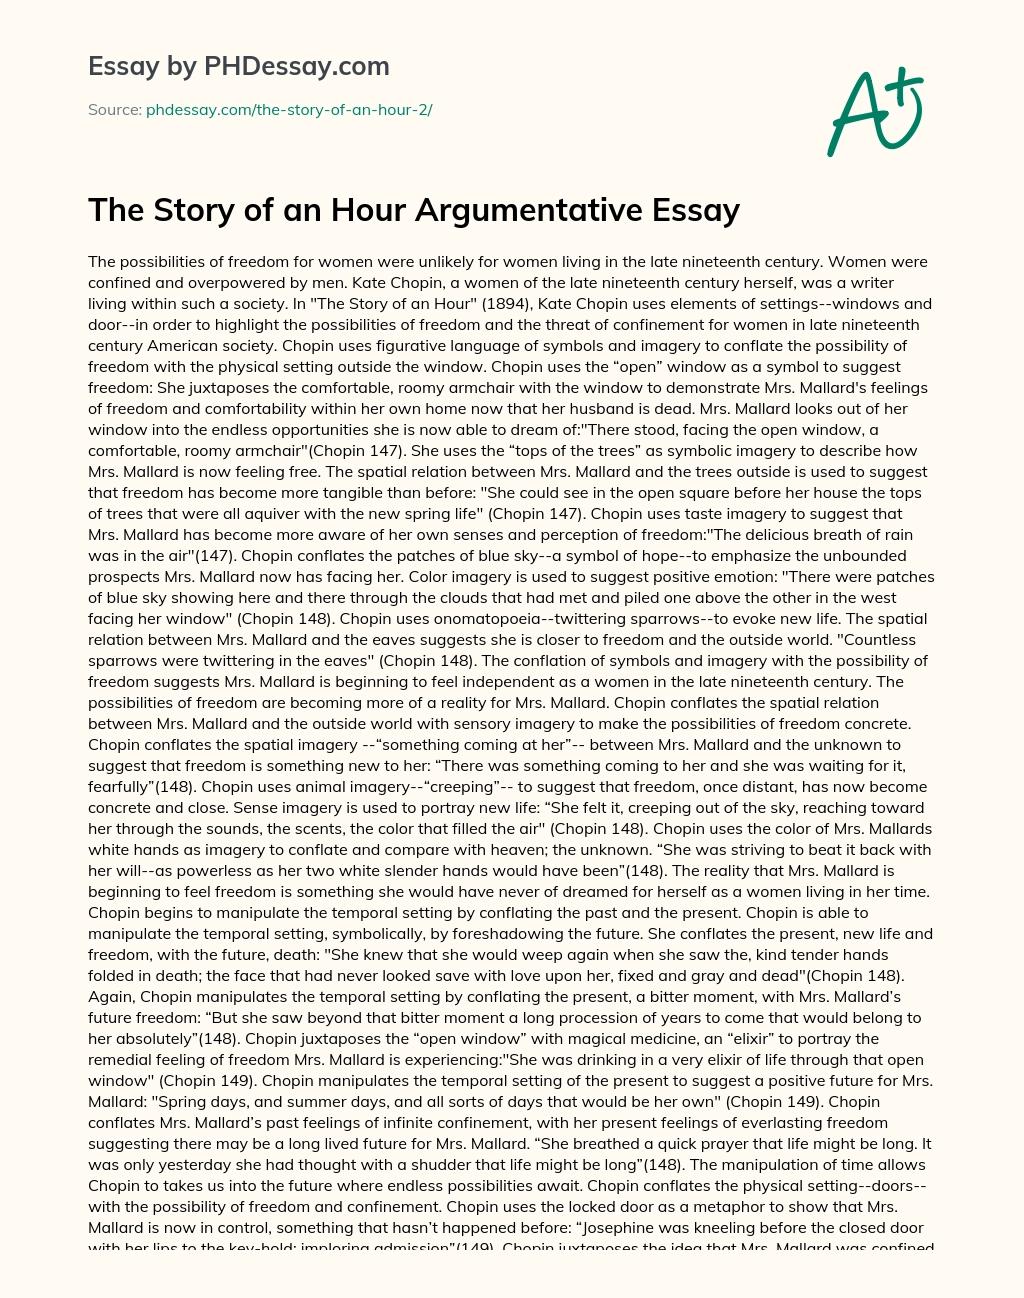 The Story of an Hour Argumentative Essay